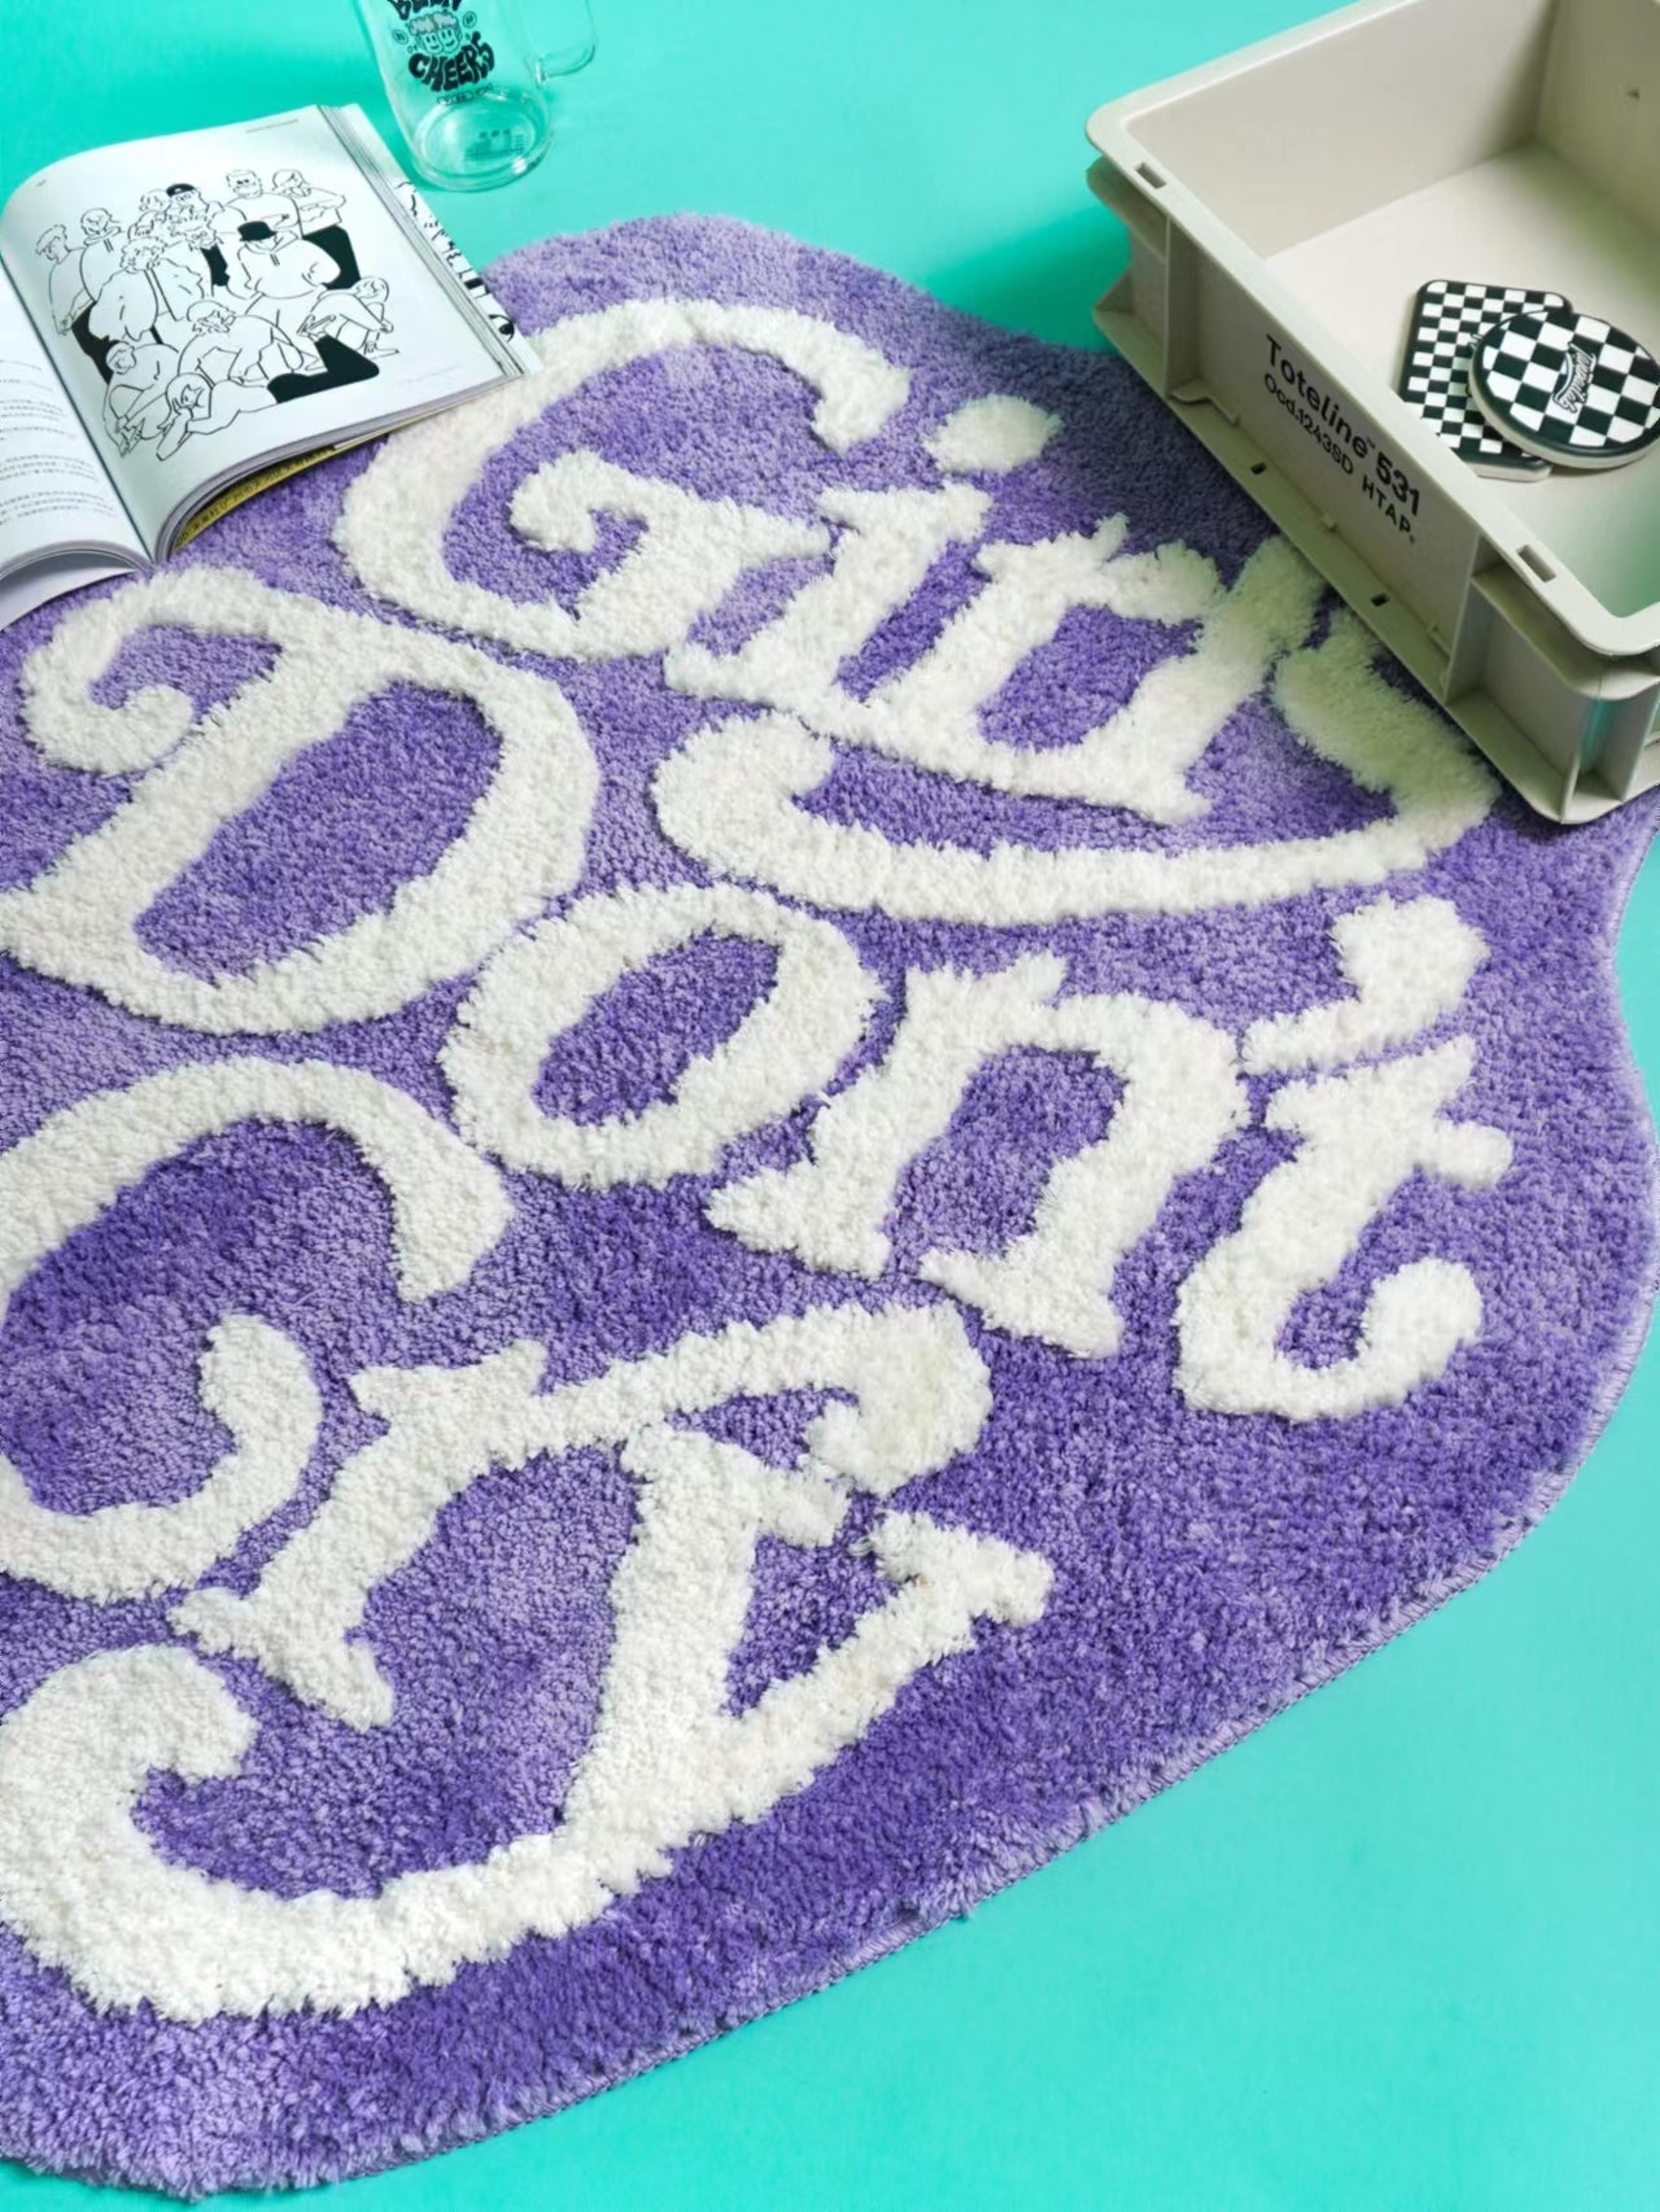 Alternate View 2 of Girls Don’t Cry Rug Purple